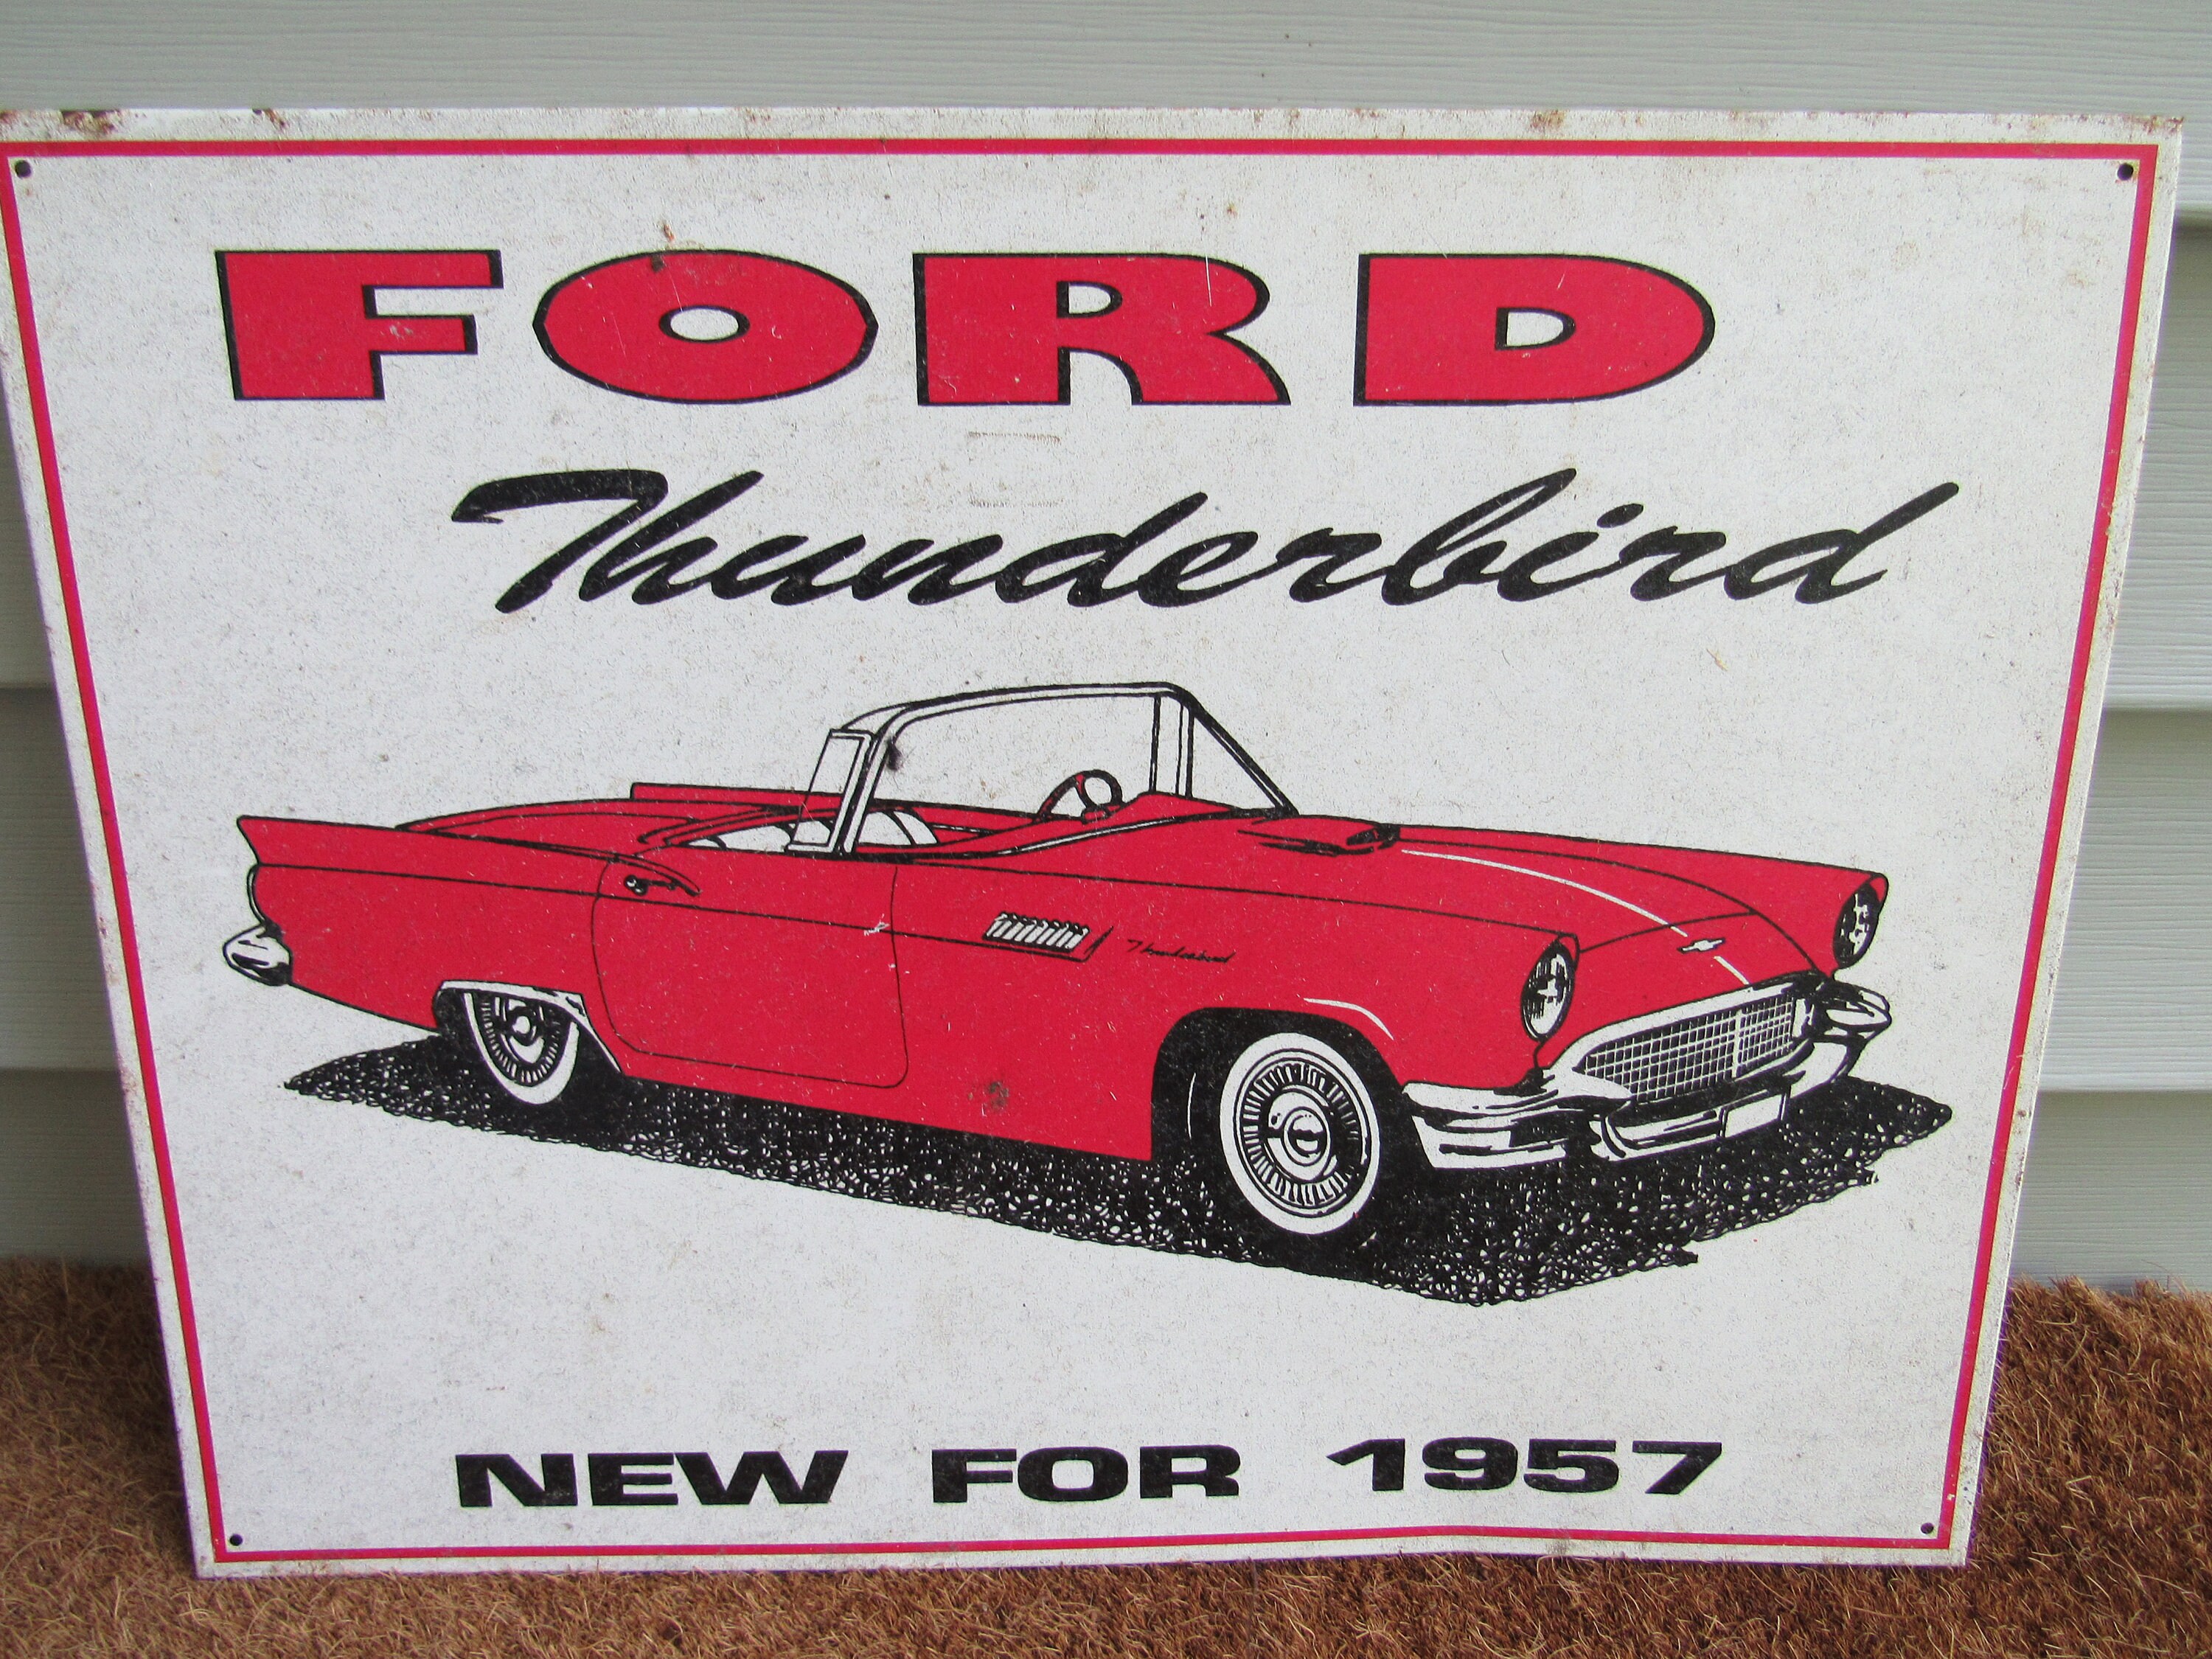 Ford Thunderbird By Pier metal sign 410mm x 320mm sf 